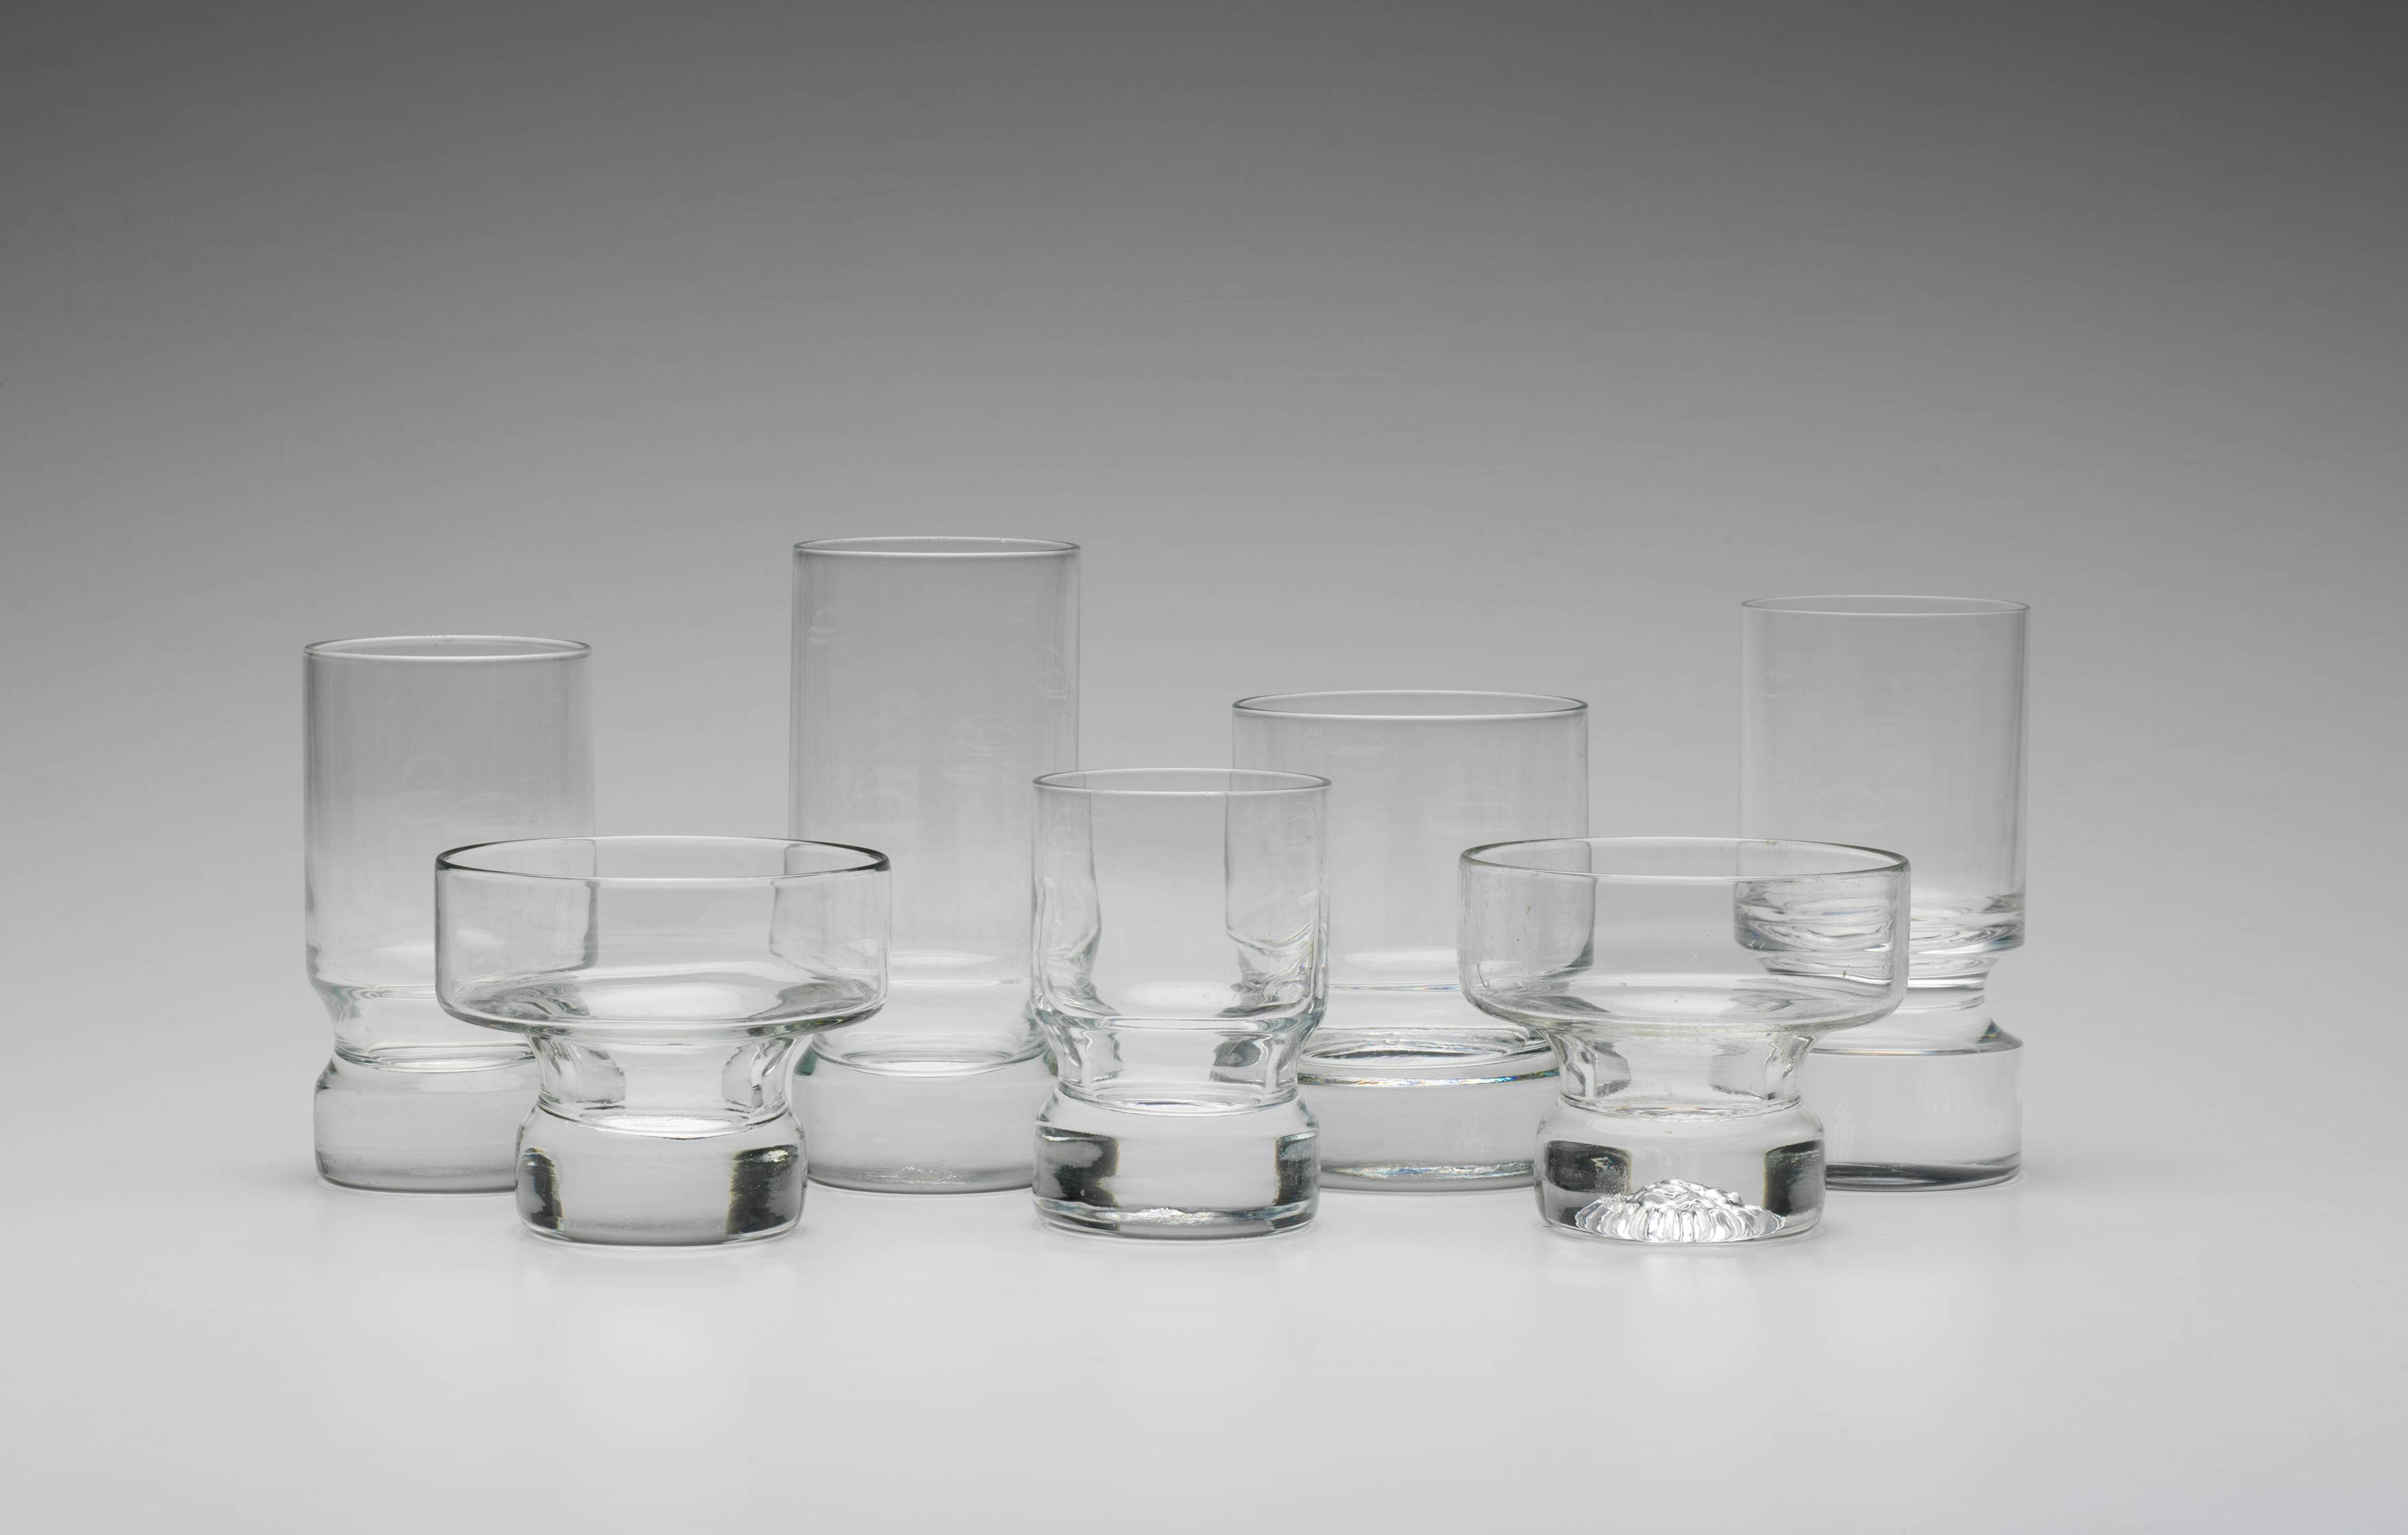 Seven drinking glasses of different shapes and sizes on a grey background.